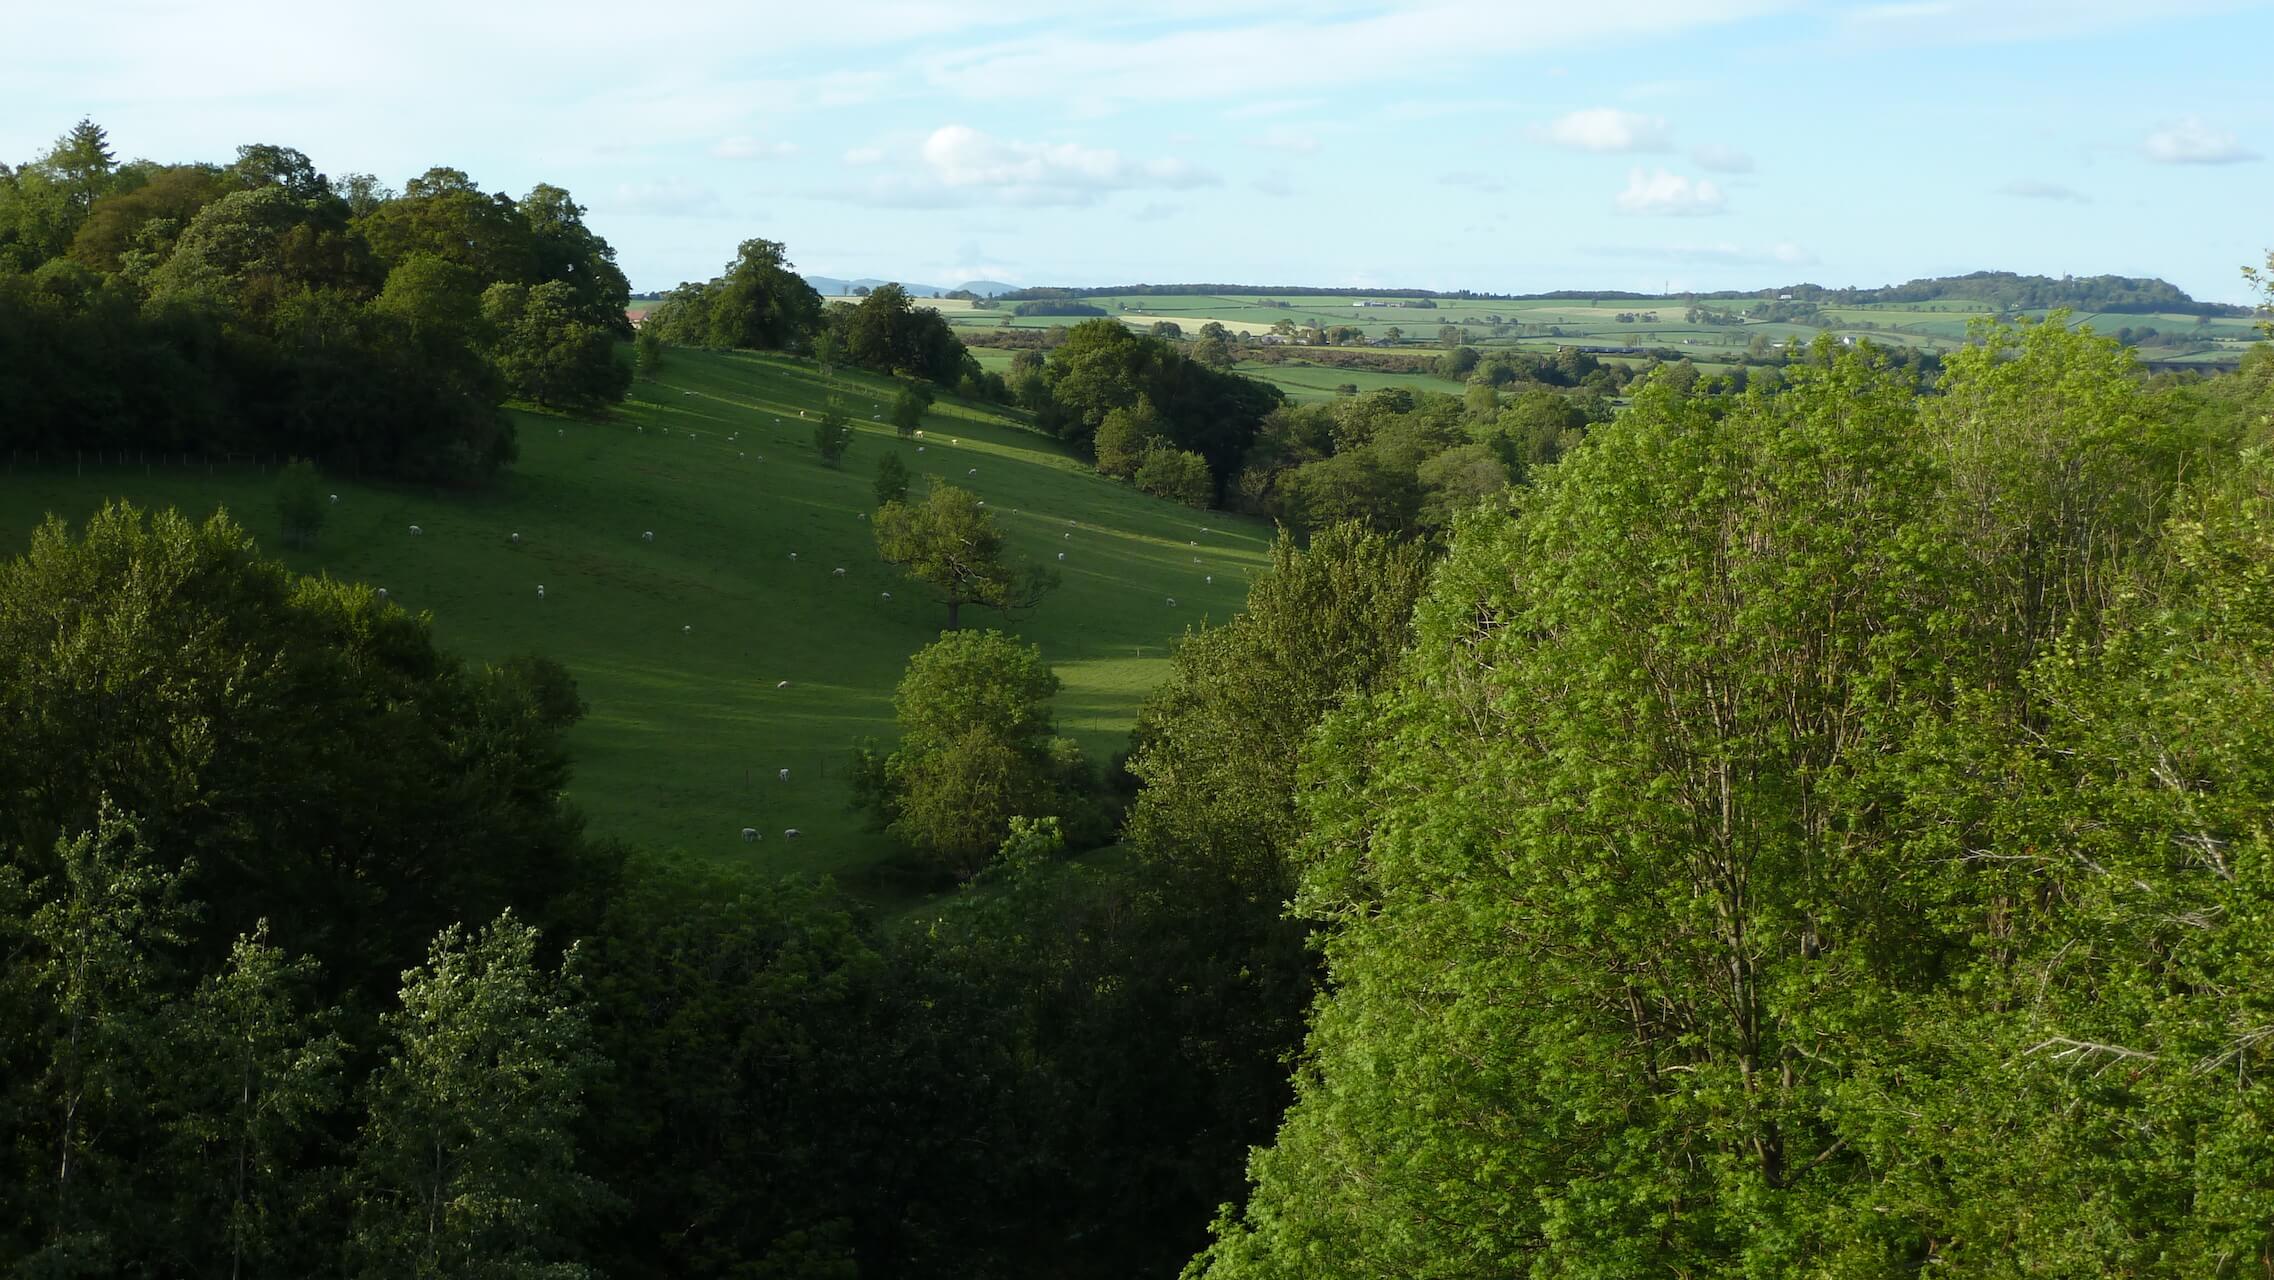 View from Avon Aqueduct